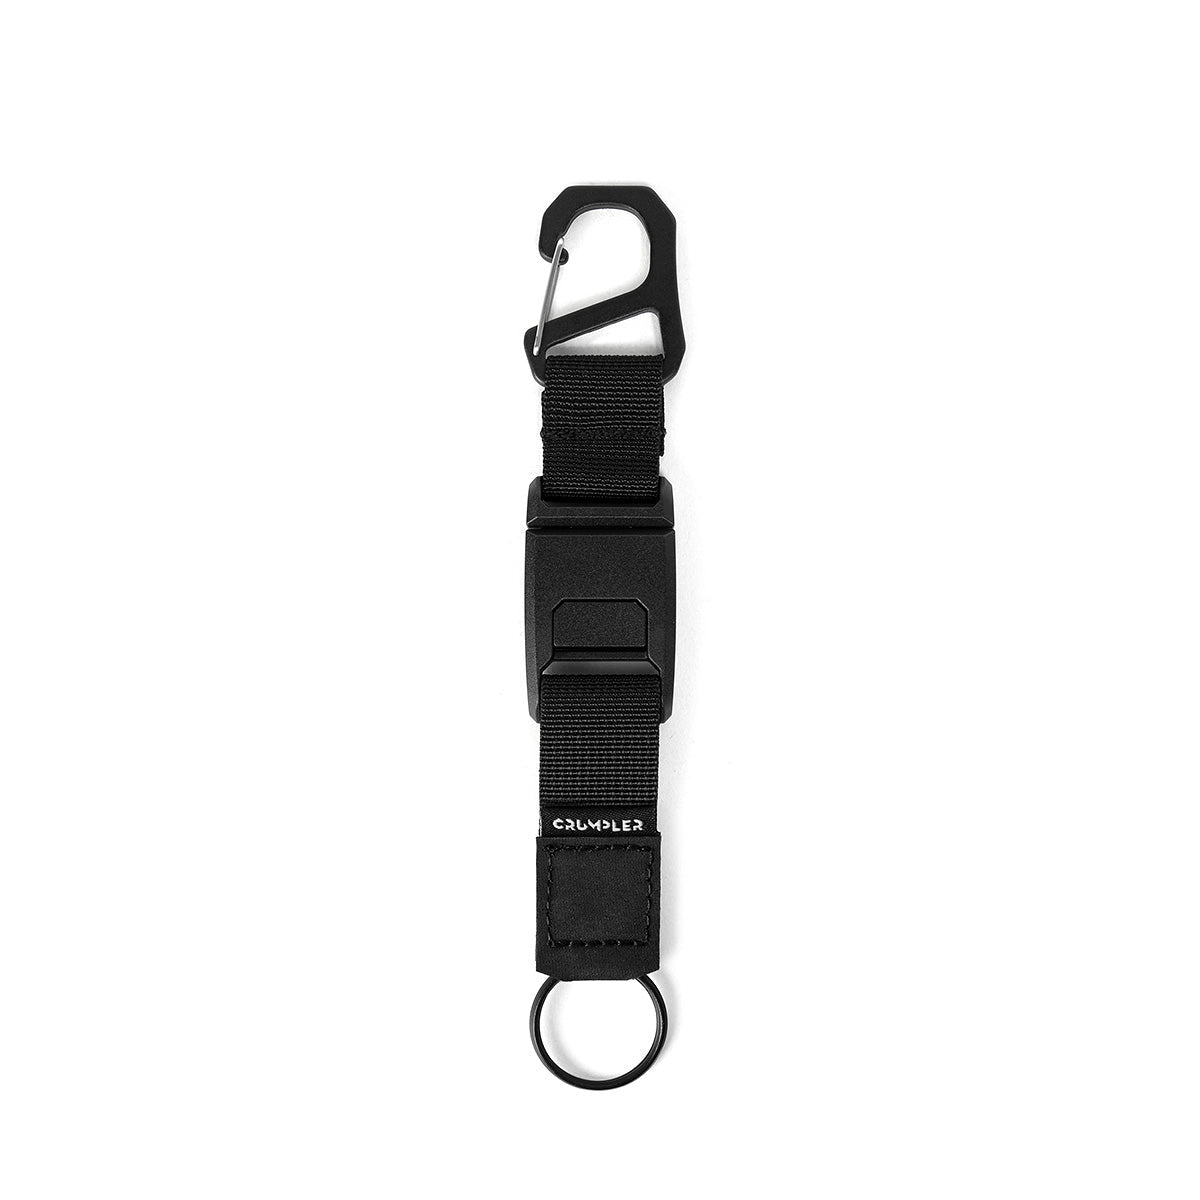 Crumpler Mantra Key Chain - #product-type#